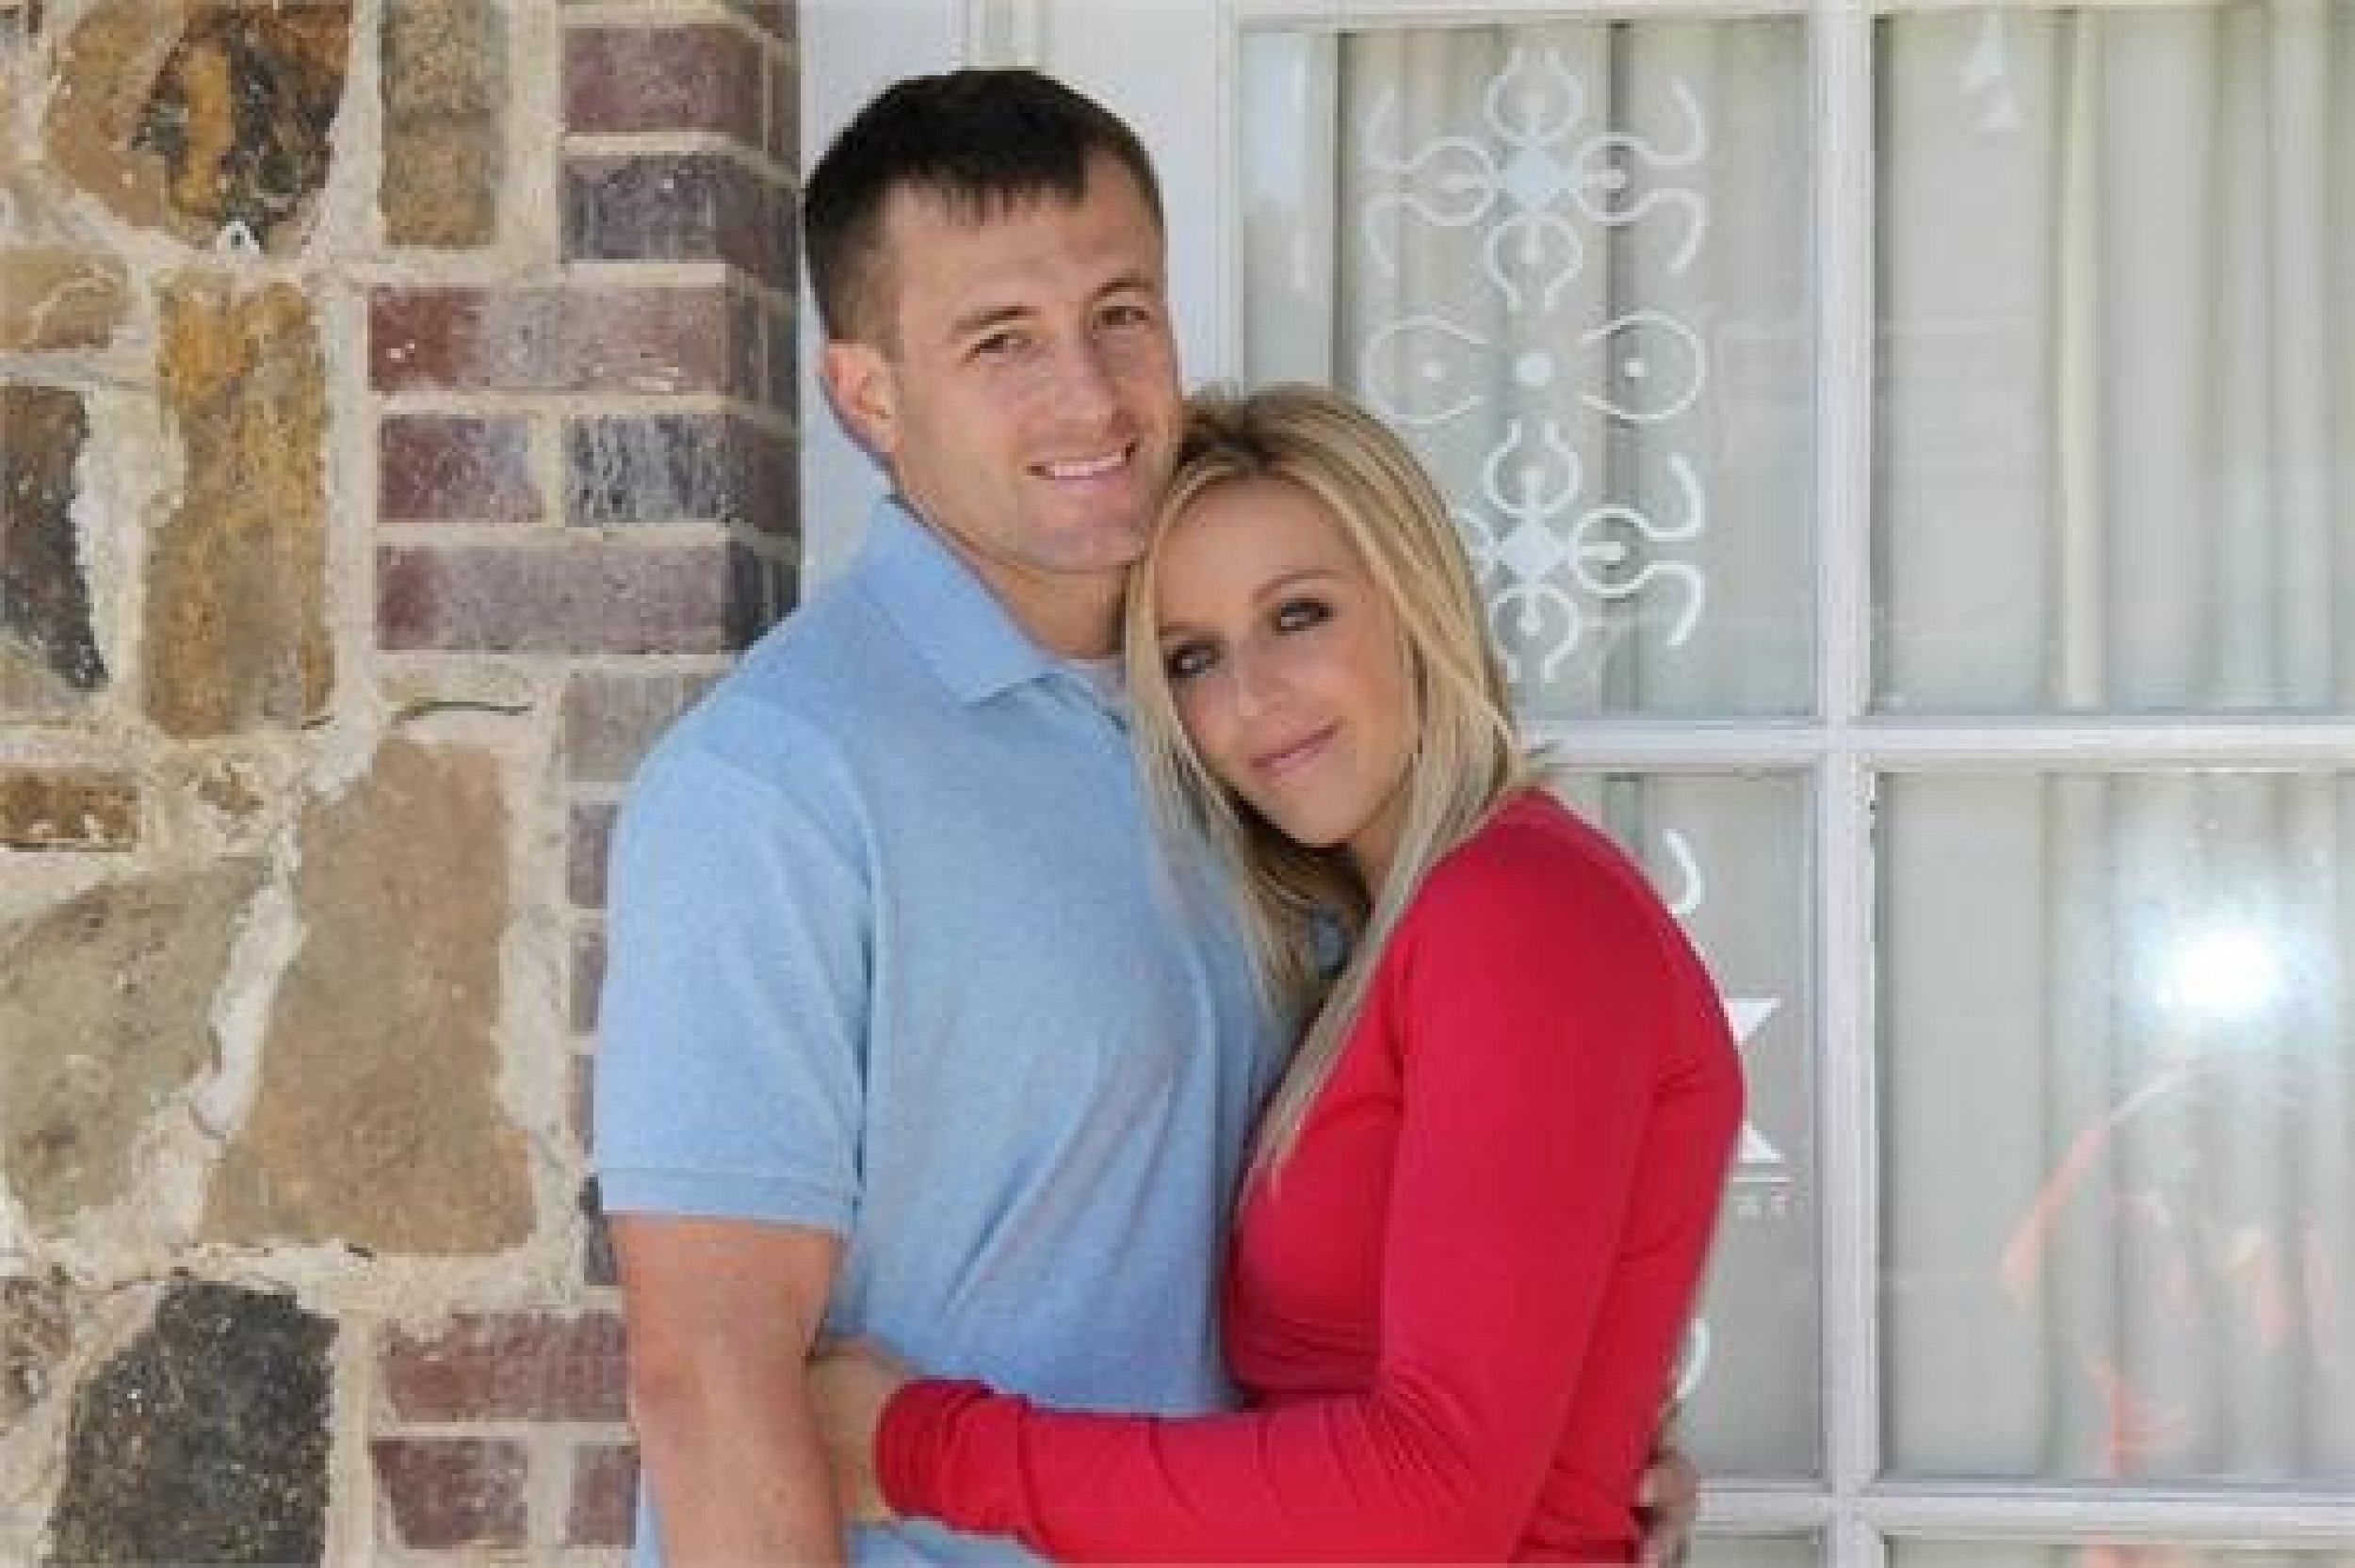 Dorrell and her one-time fiancee Josh Morgan. They were to be wed in June but Dorrell called off the engagement a week before the crash.